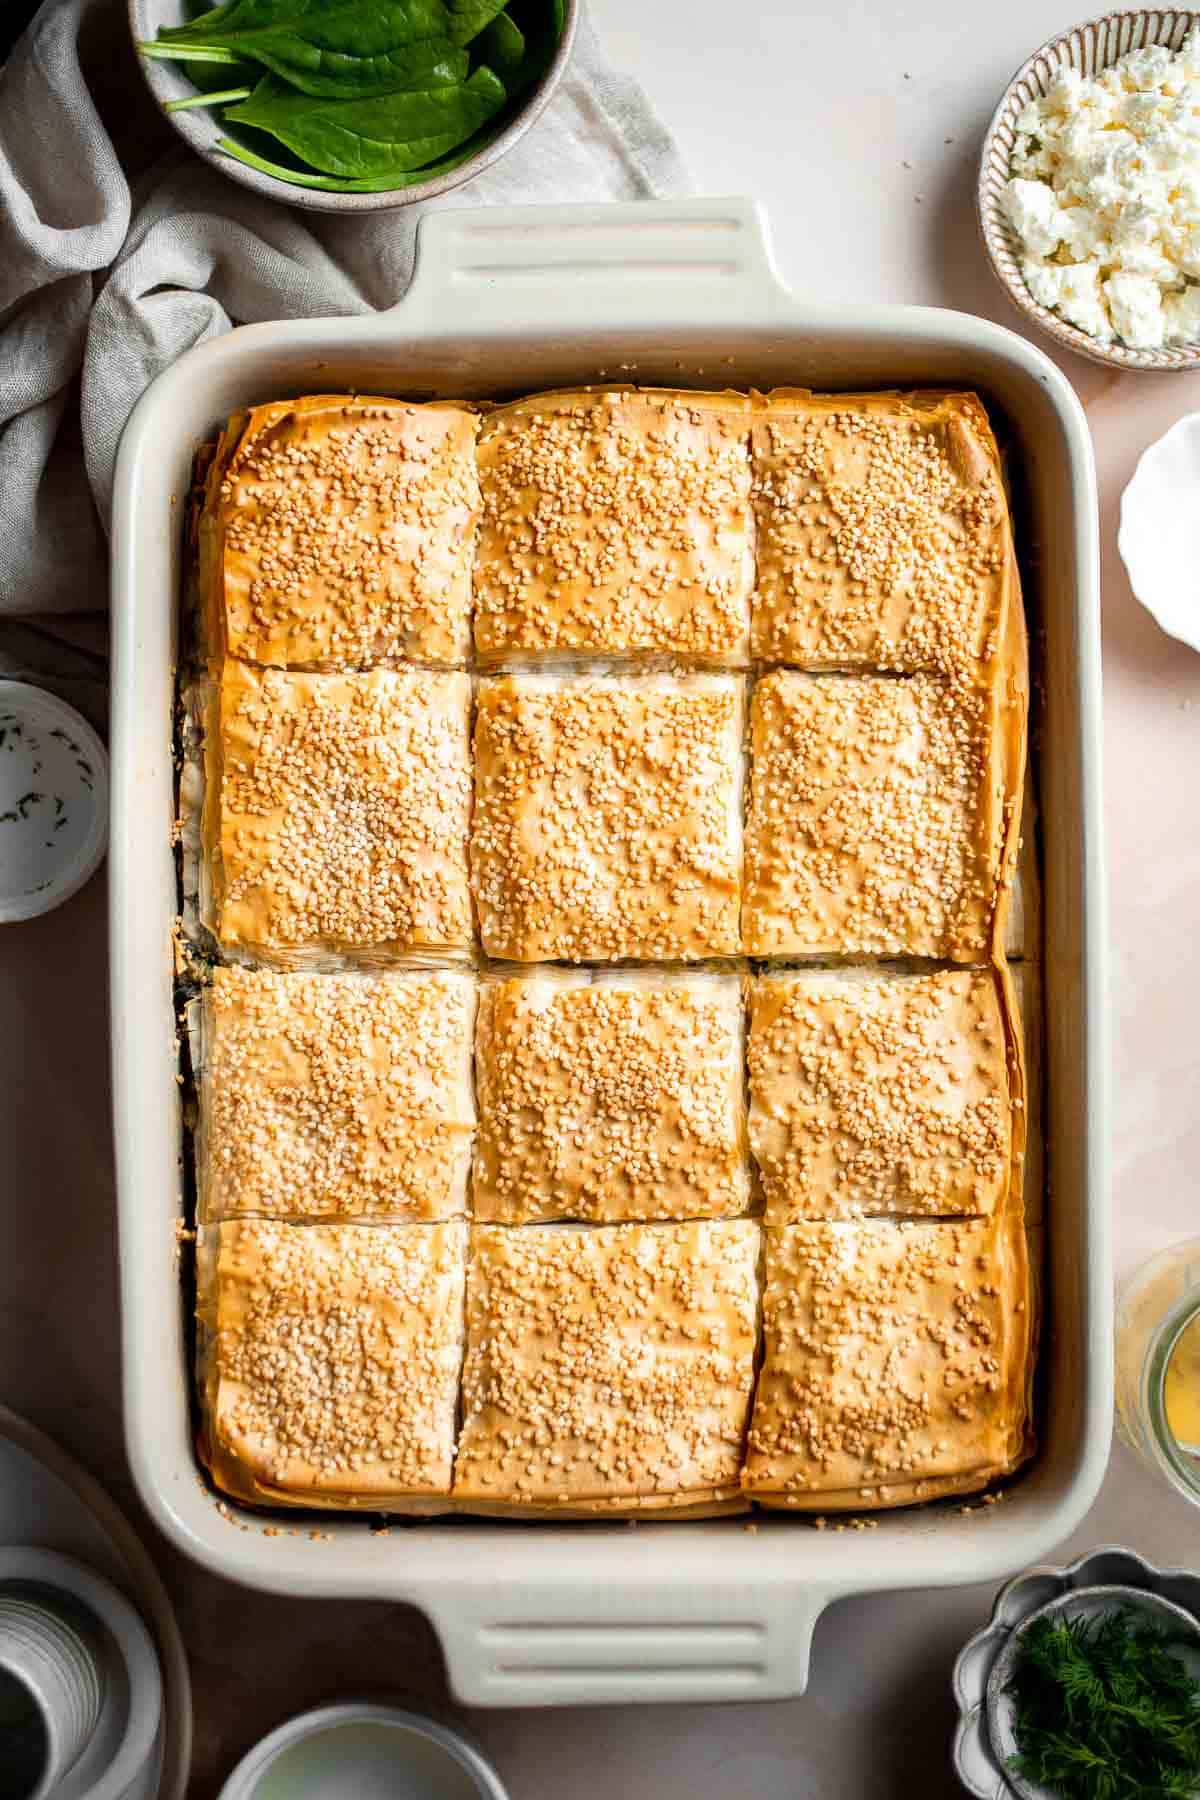 Spanakopita is a traditional Greek savory pie famous worldwide for its cheesy spinach filling nestled between layers of phyllo dough. It's easy to make too! | aheadofthyme.com